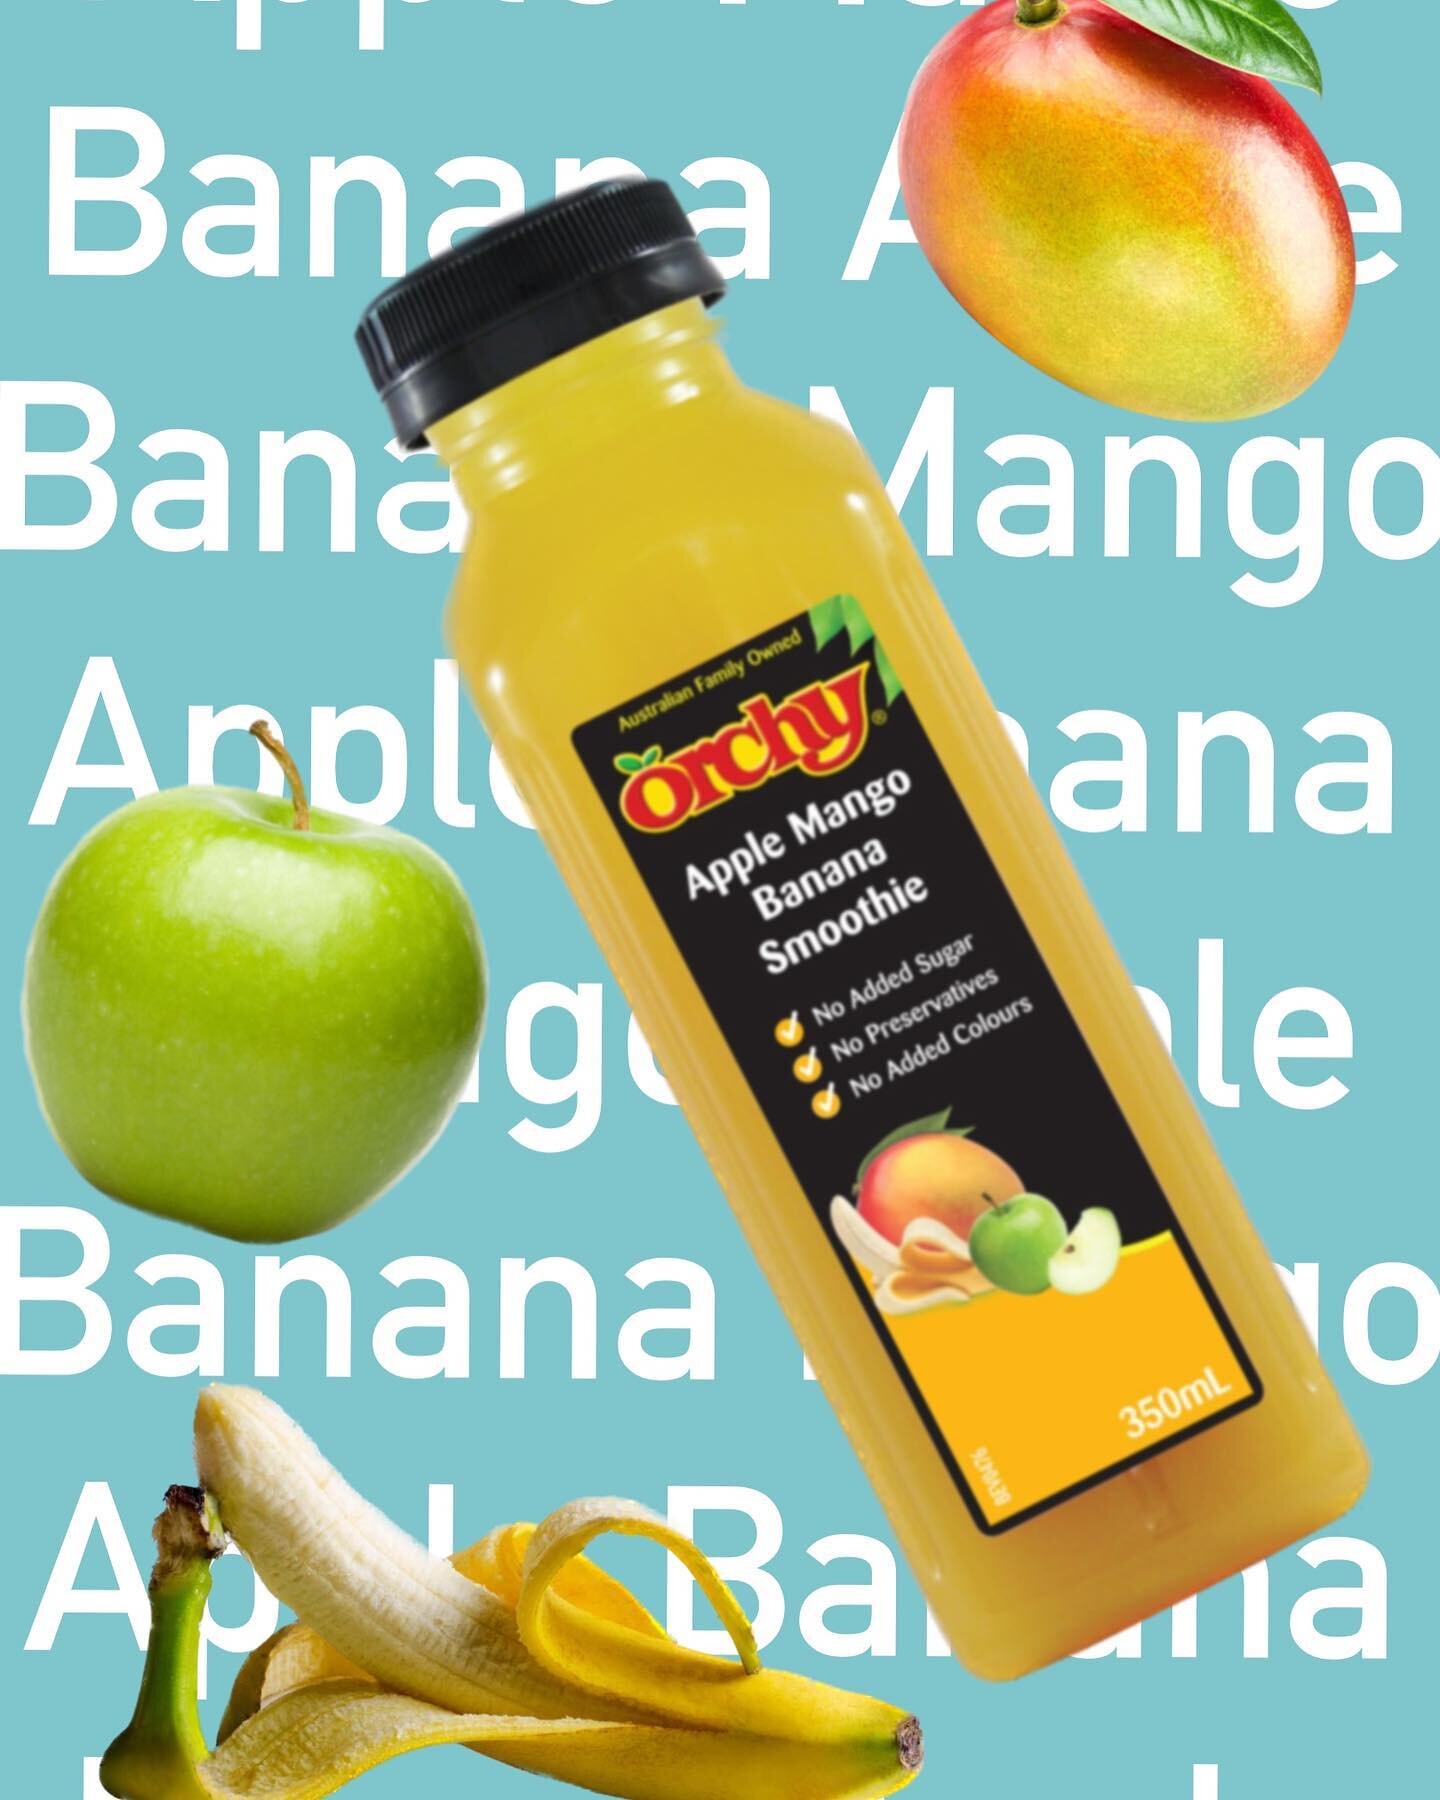 Remember our Orchy Mango Splash Fruit Smoothie? Well we decided to give her a new look and &lsquo;ain&rsquo;t she purty &lsquo;🤠. Same great taste just a new look!! 

#orchyfruitjuice #orchyjuice #fruitsmoothie #smoothie #juice #fruit #original #rel